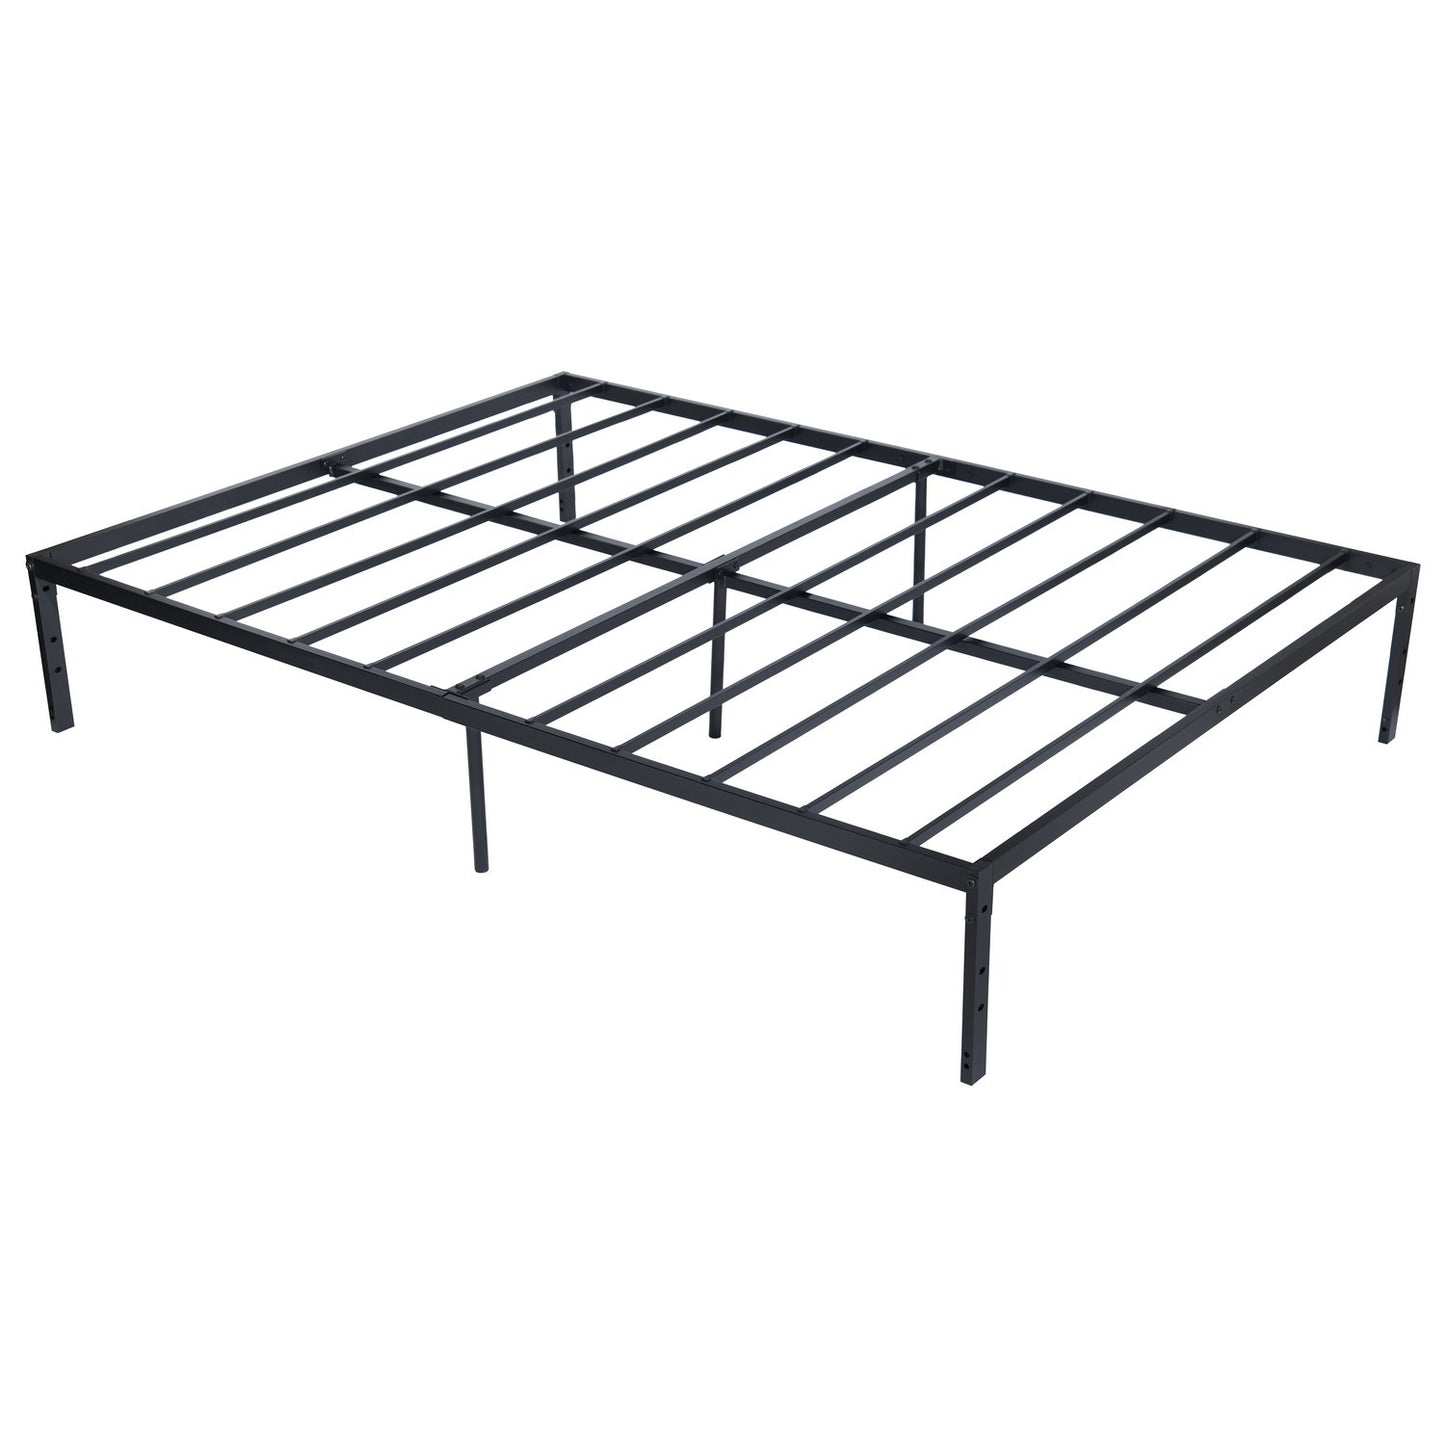 Modern Full Metal Queen Size Bed with Slat Support - NO Mattress - No Box Spring Needed